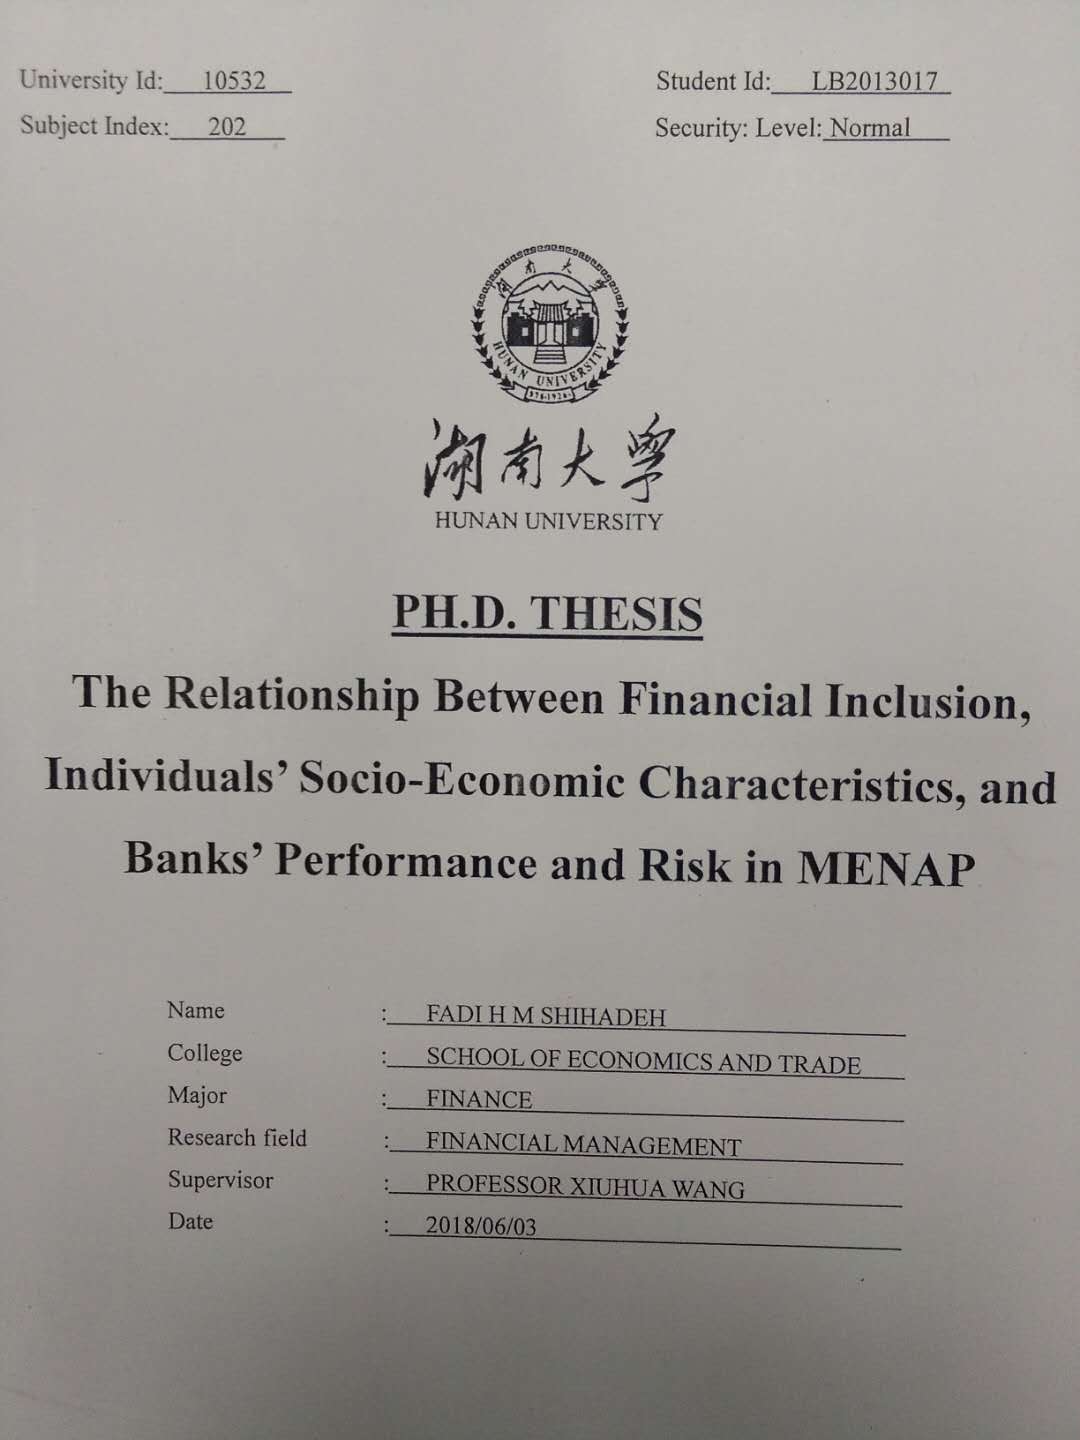 Dissertation on financial inclusion